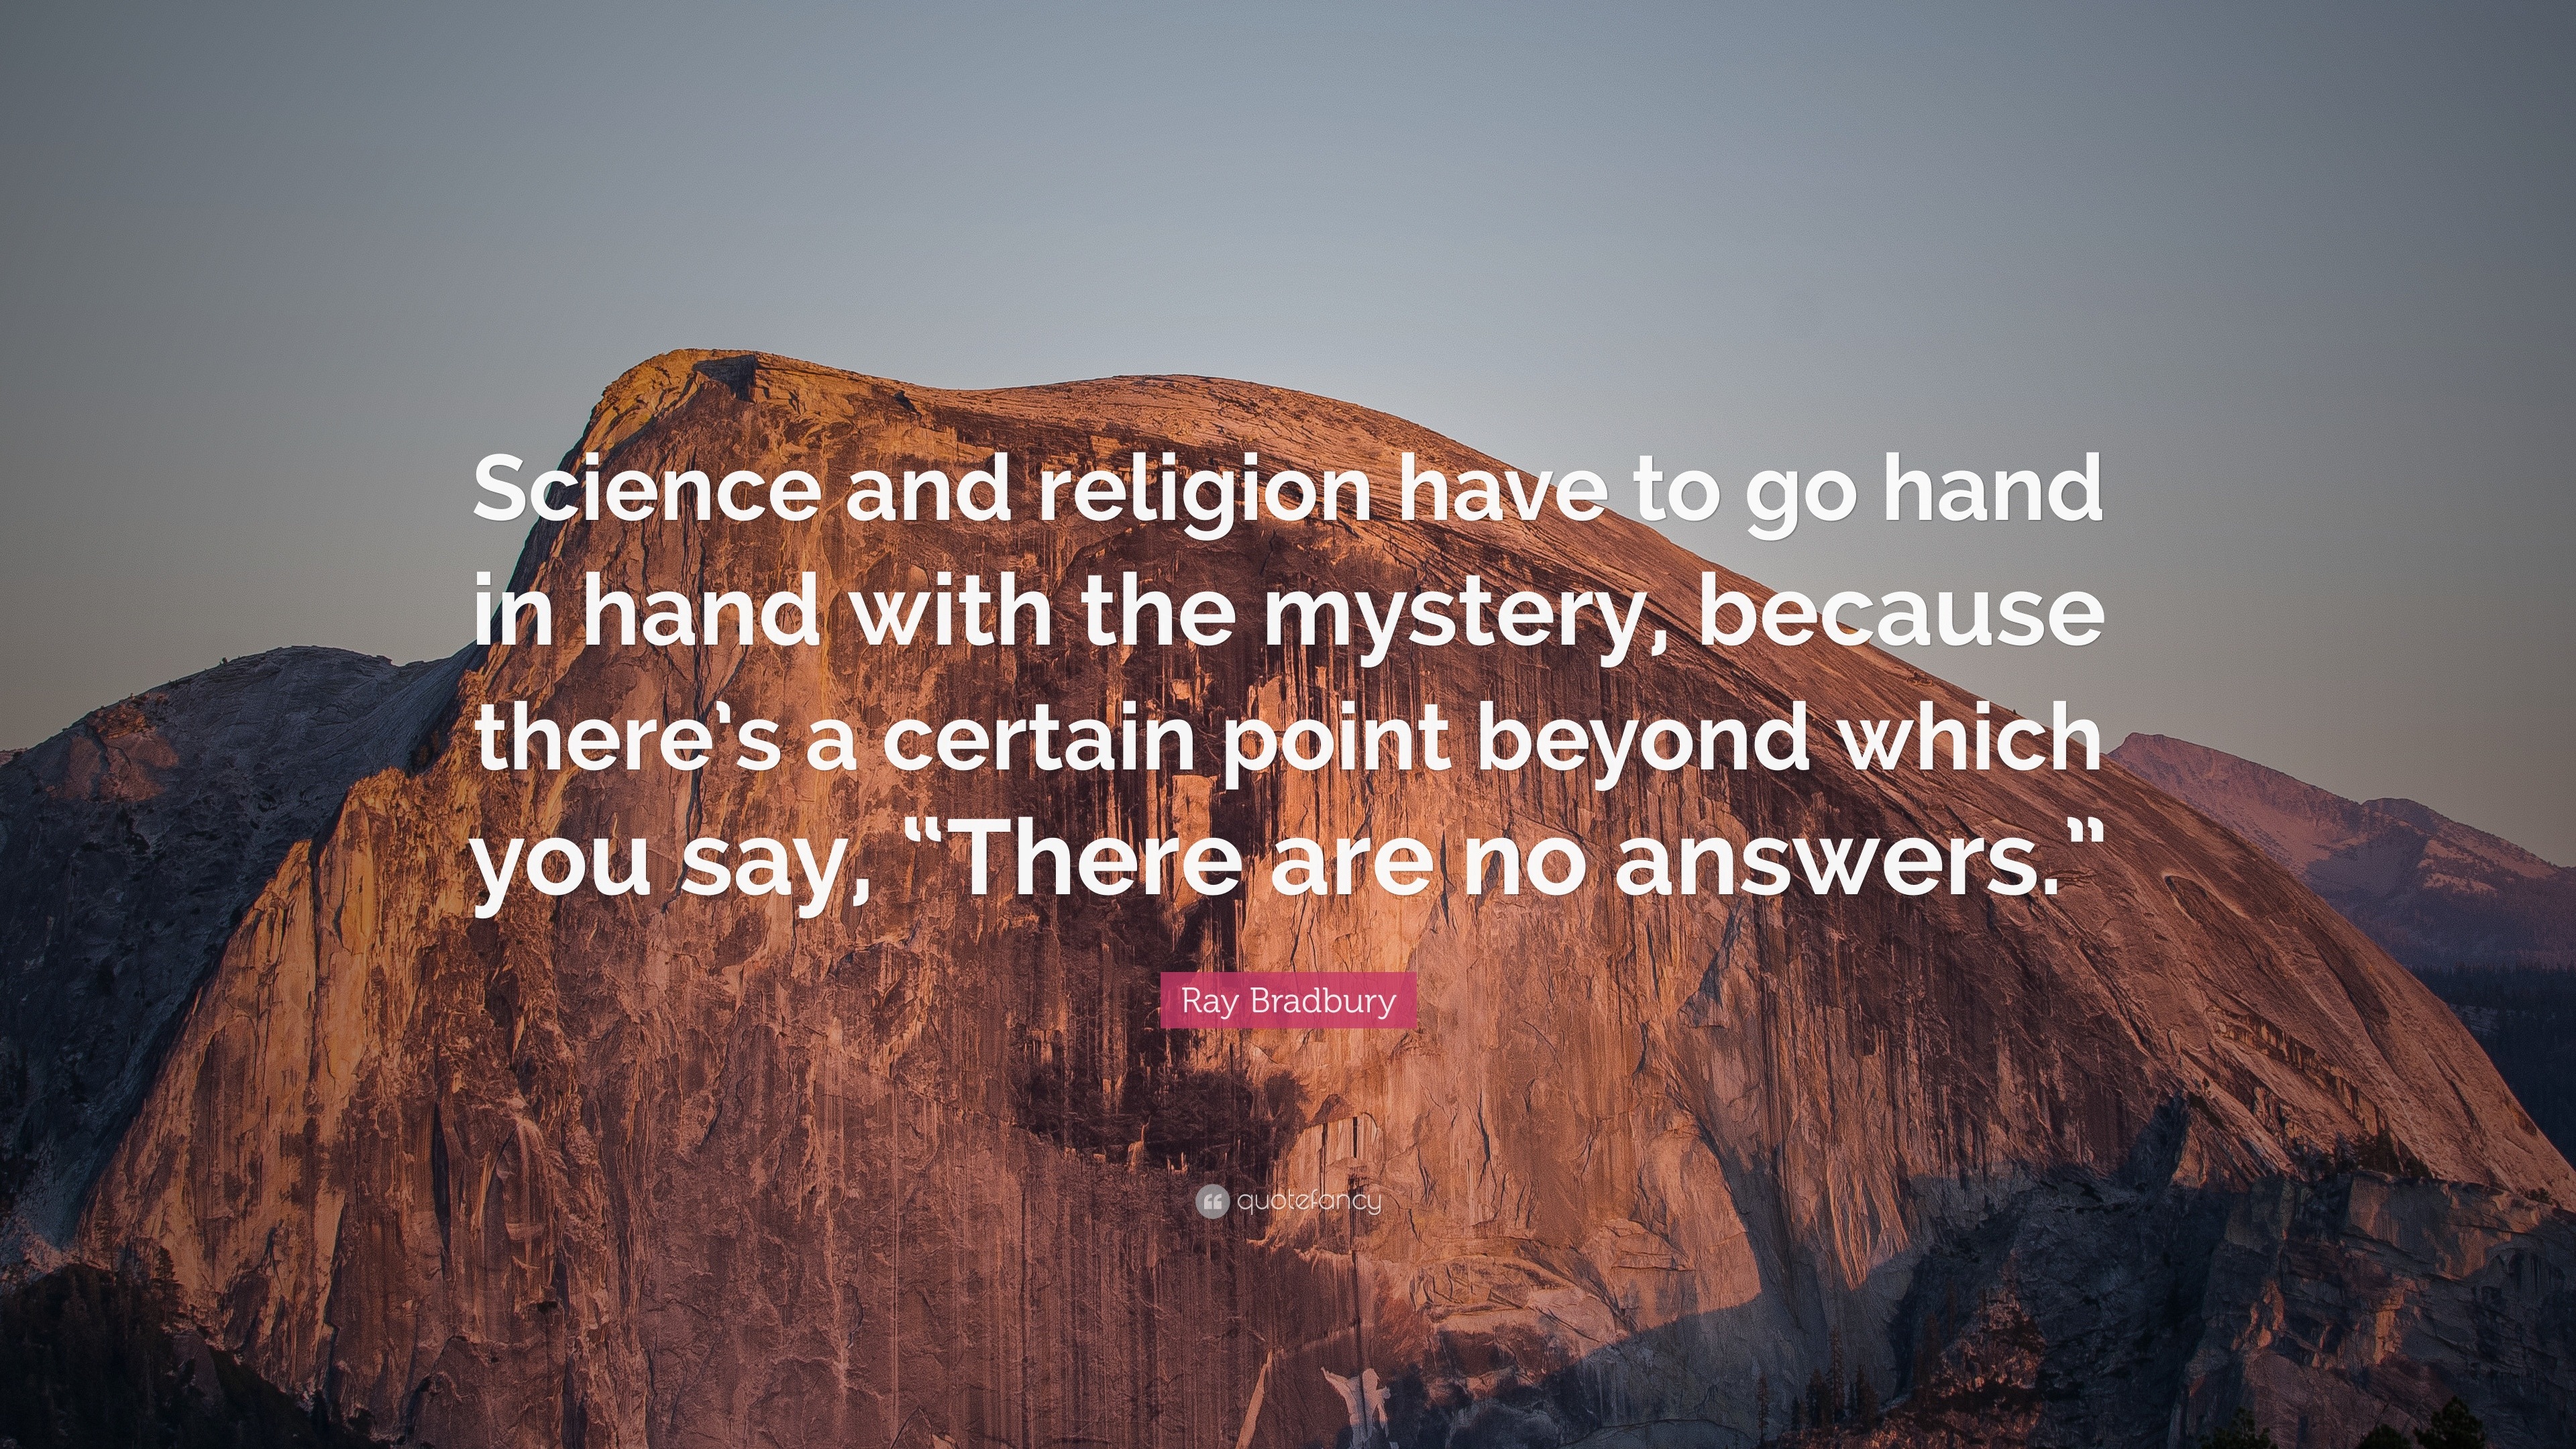 speech on religion and science go hand in hand